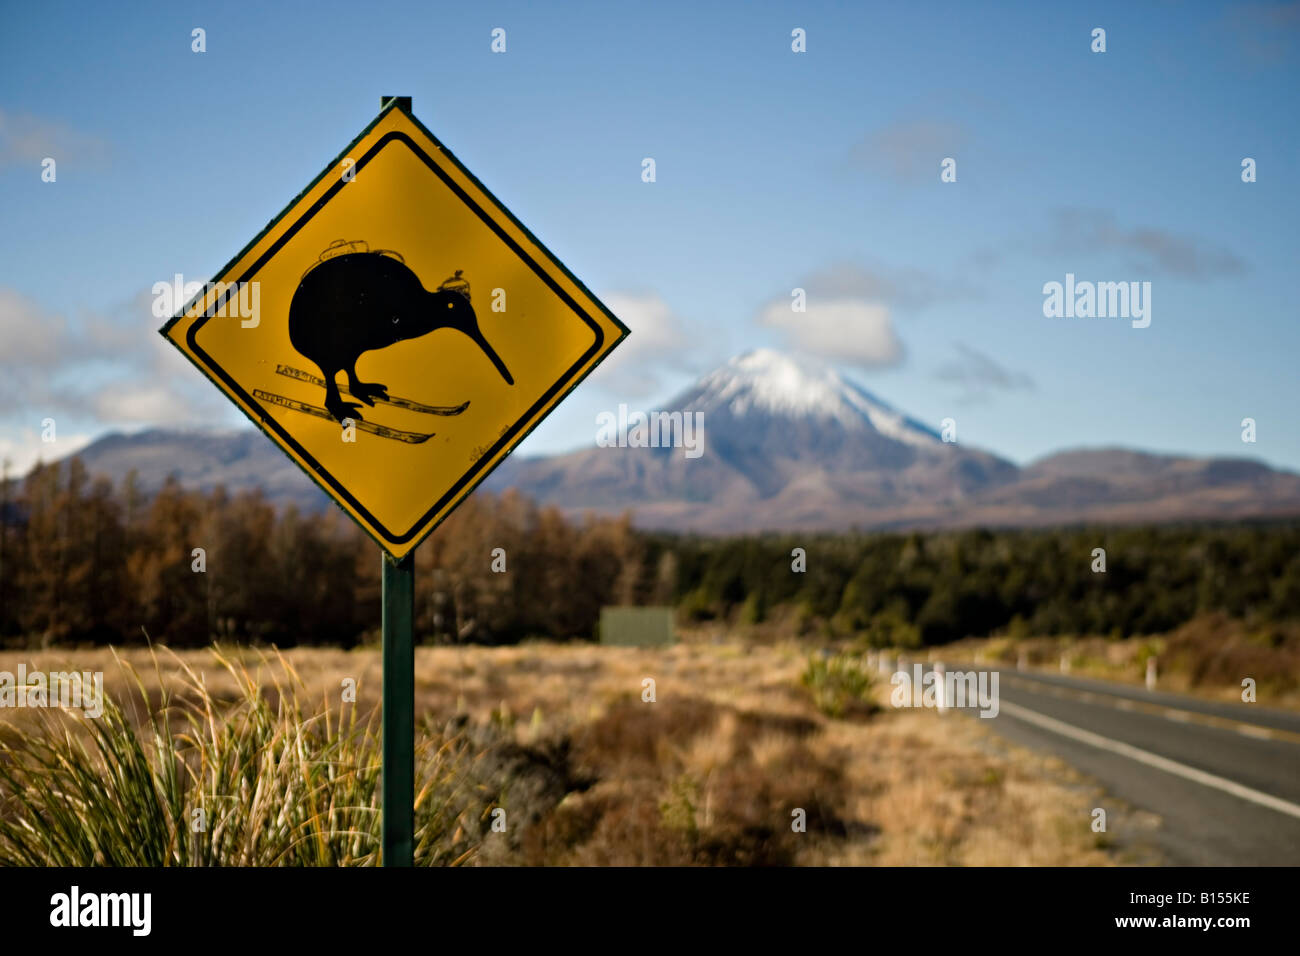 Defaced roadsign alerting drivers to beware of running over Kiwis Stock Photo